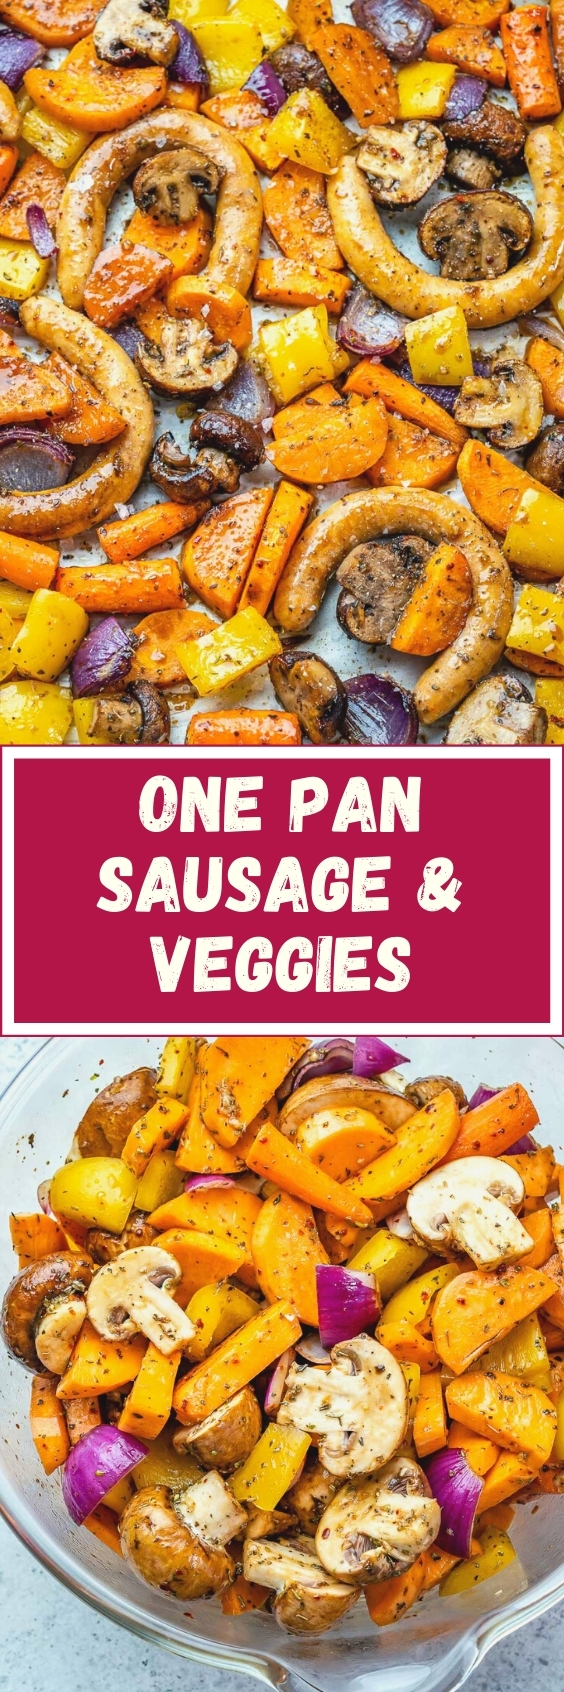 One Pan Sausage Dinner with Fall Vegetables Recipe - Rachel Cooks®